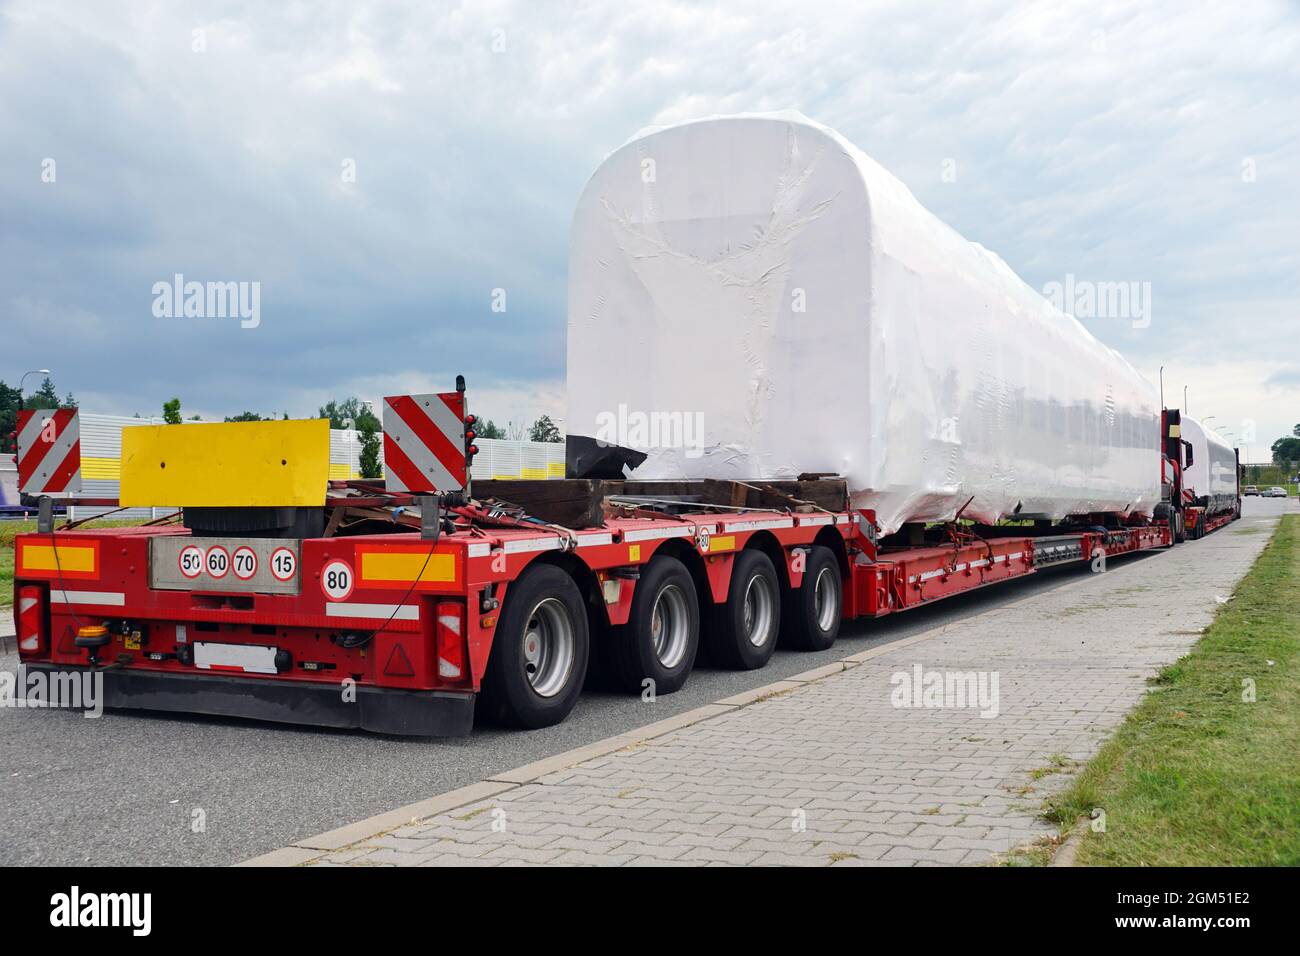 Oversize load or exceptional convoy. A truck with a special semi-trailer for transporting oversized loads. Very long vehicle. Stock Photo